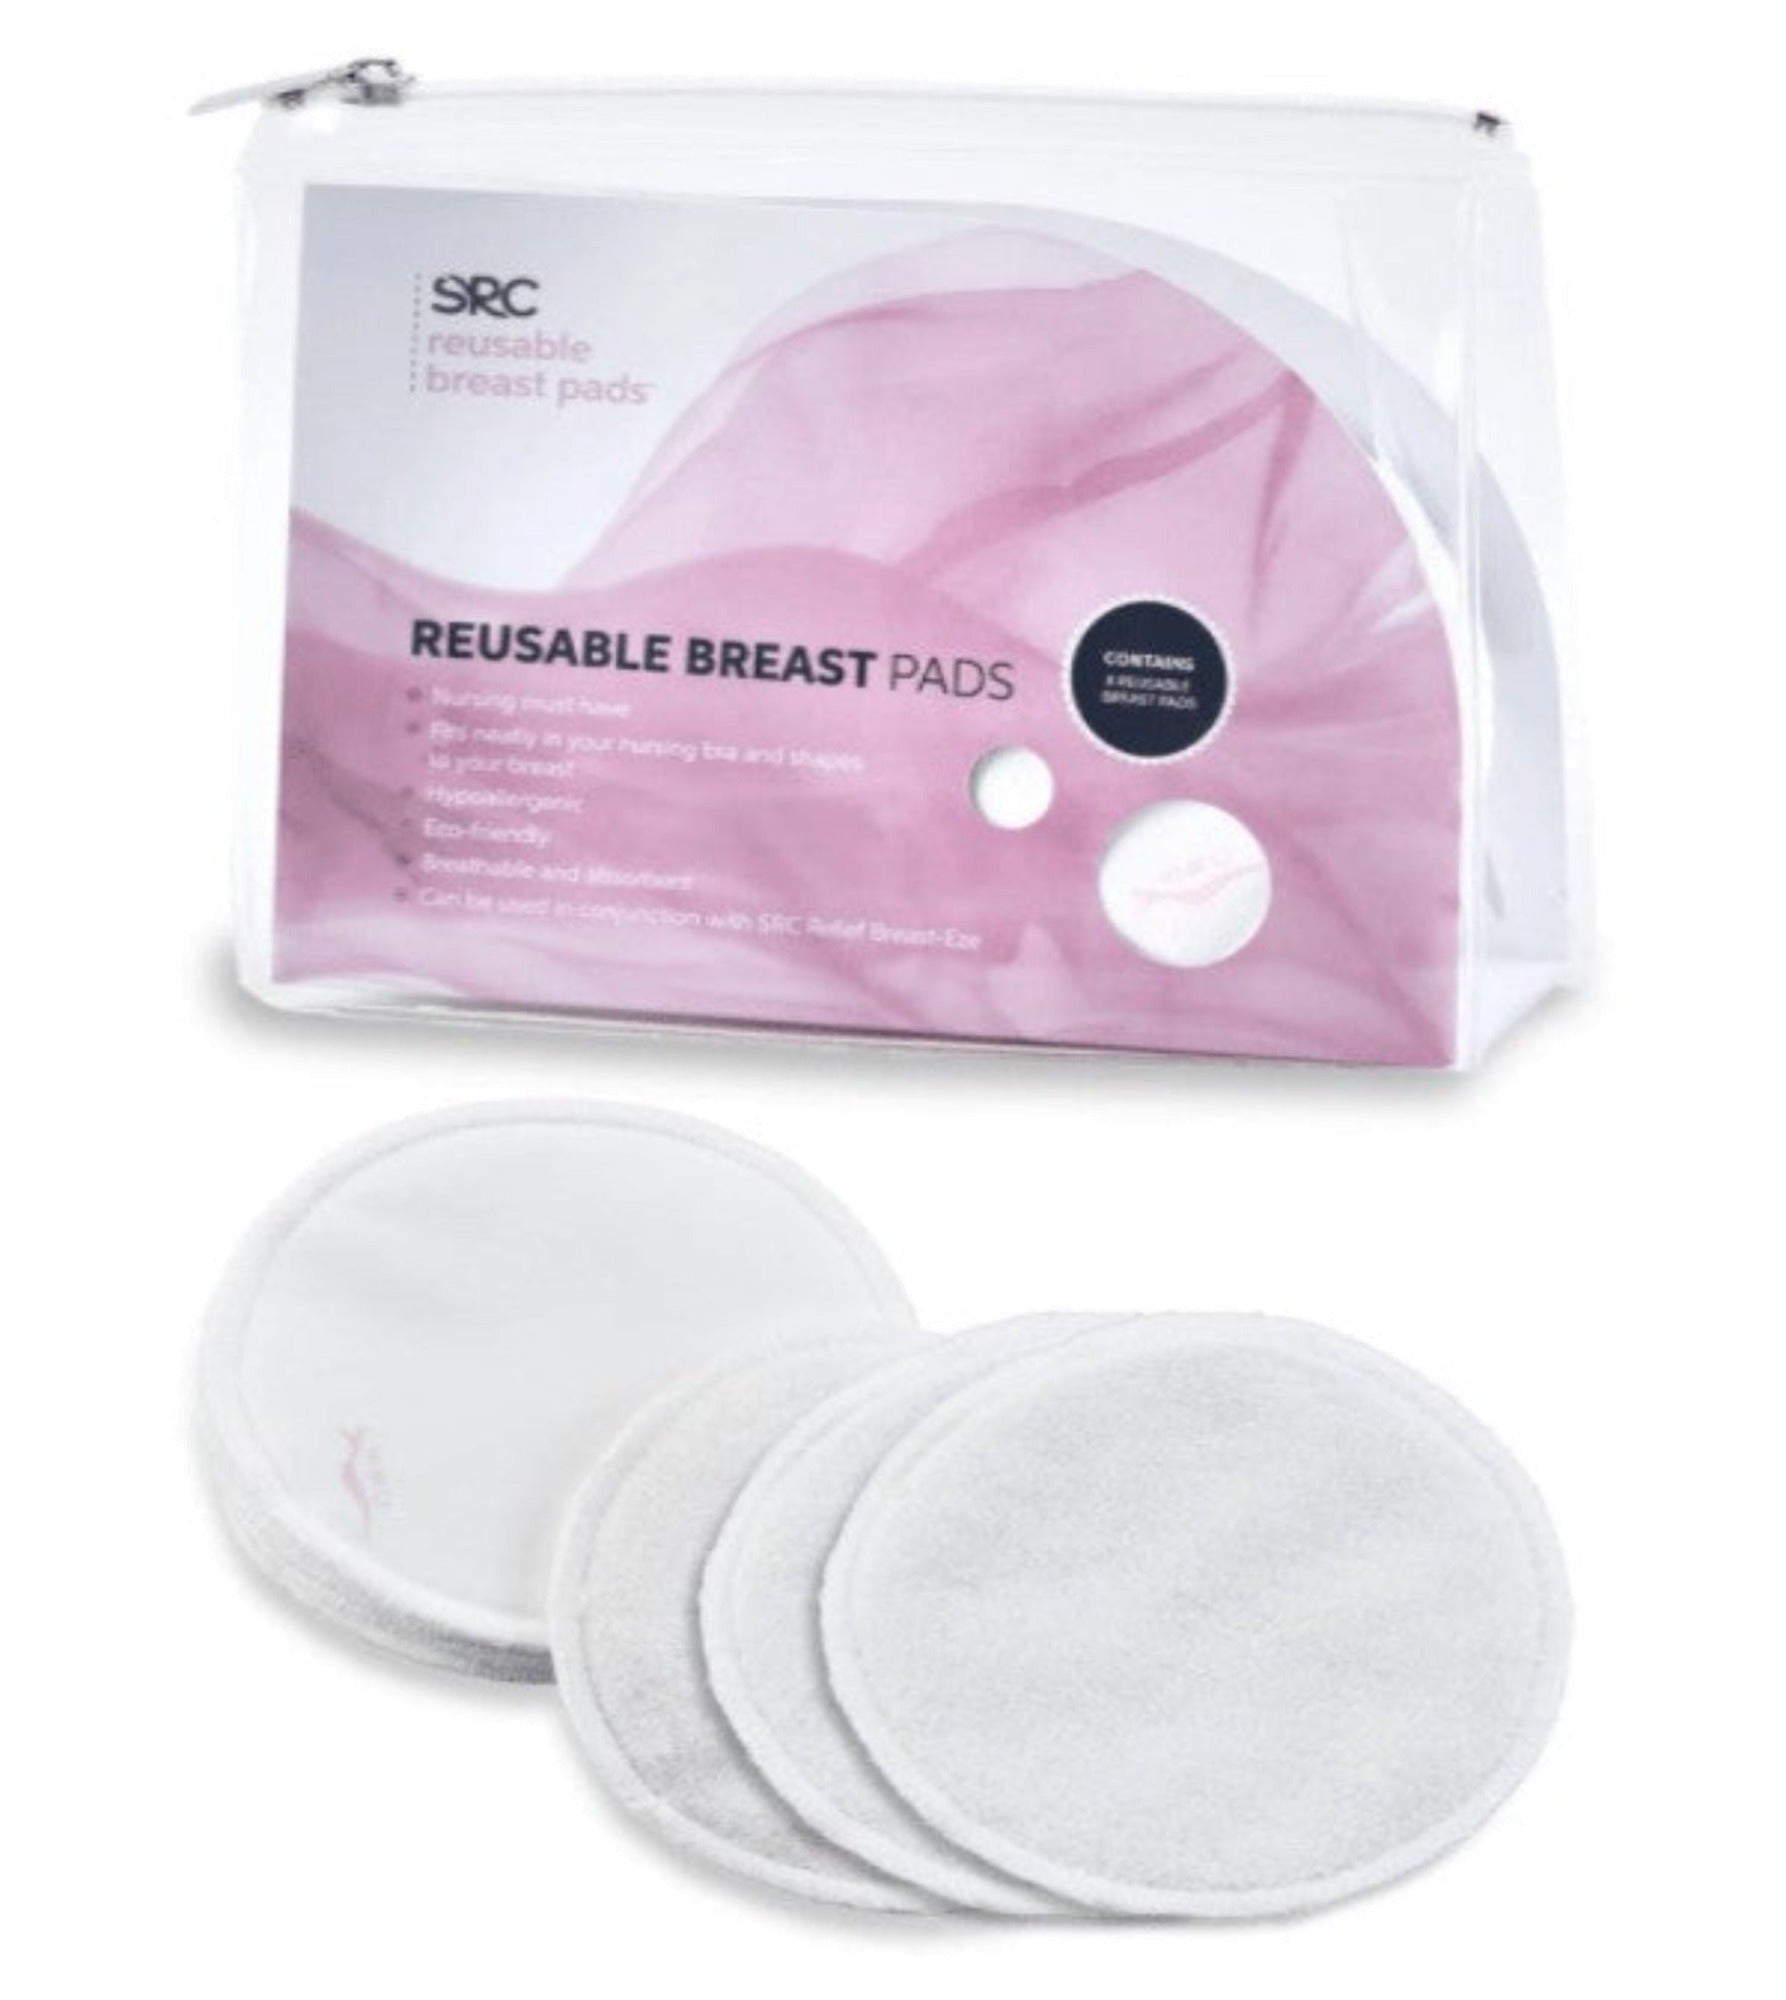 SRC Reusable Breast Pads - 8 Pack